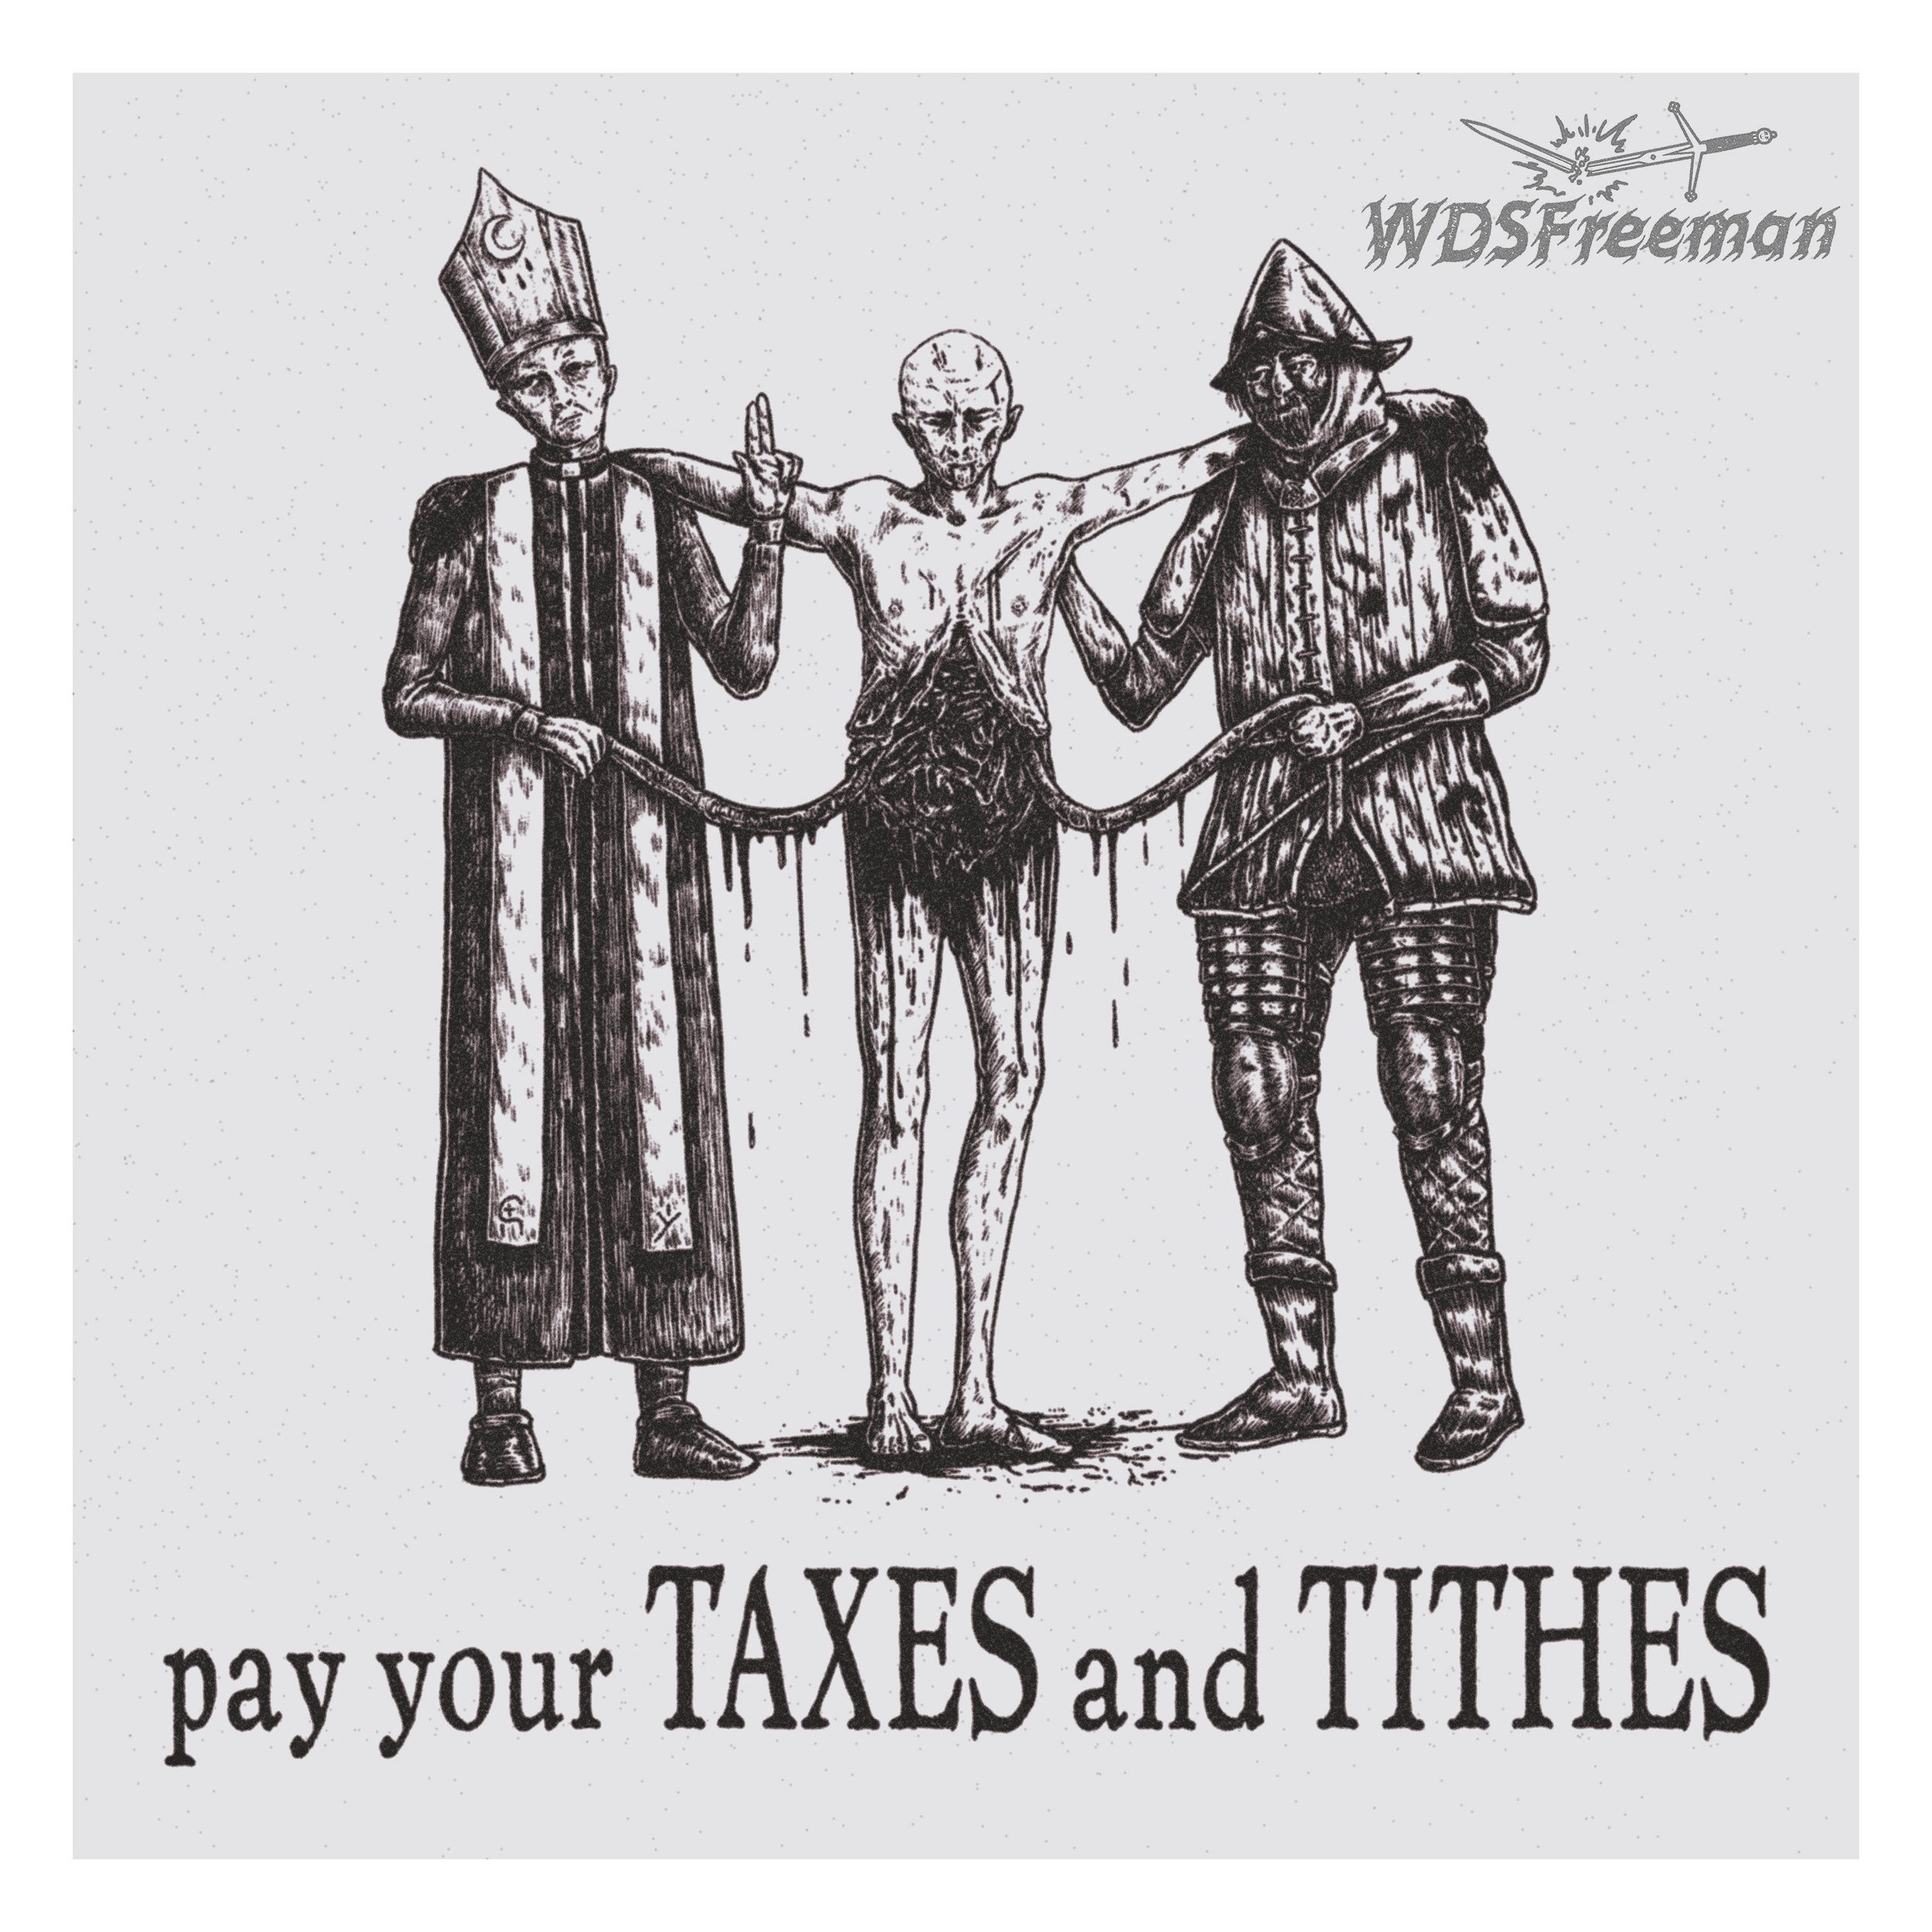 Taxes and Tithes